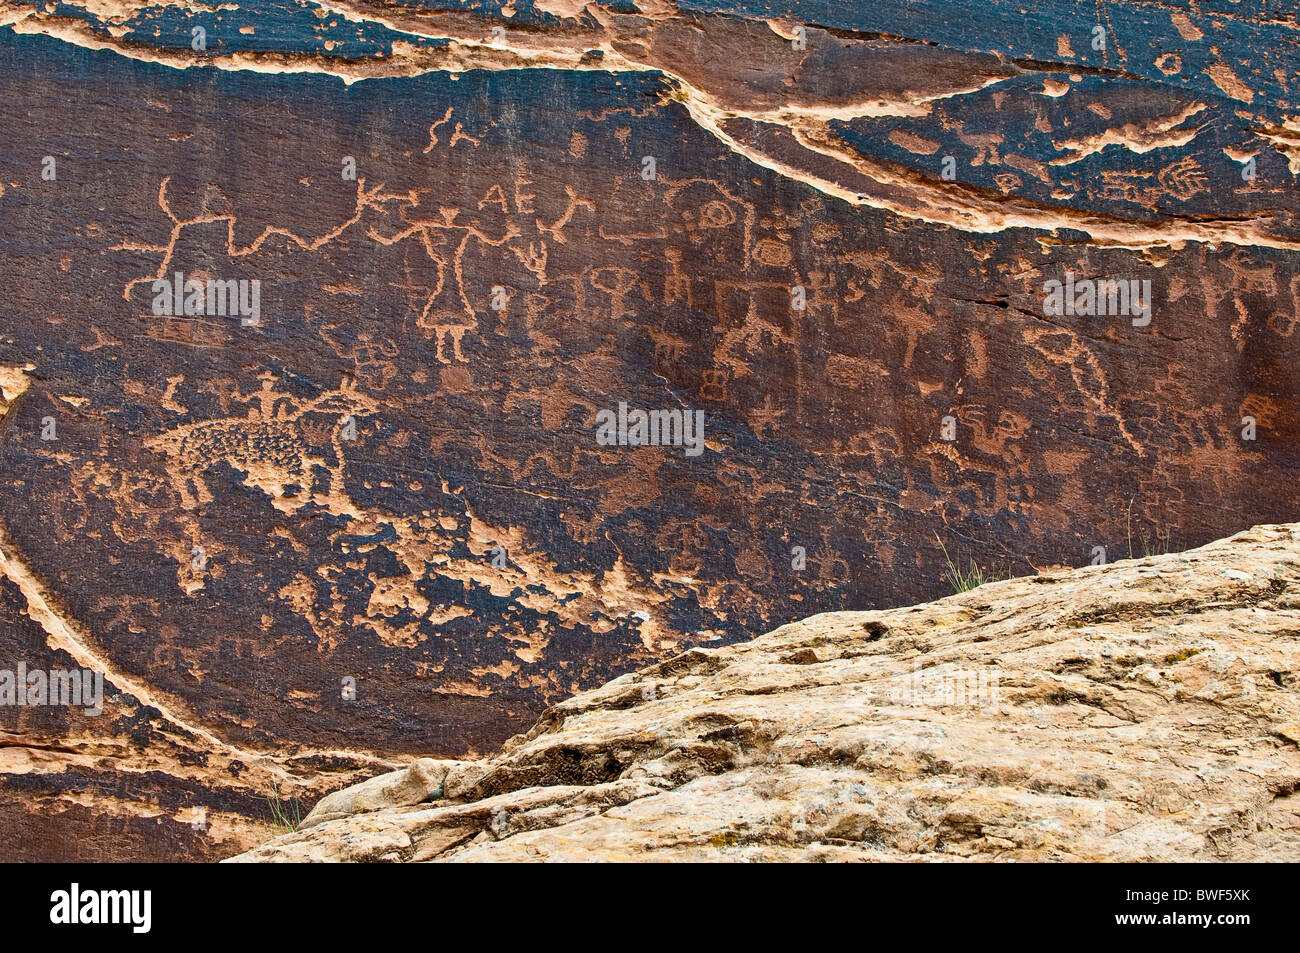 About 3000 year old rock paintings by Native Americans, Sans Island, near Bluff, North Utah, USA Stock Photo